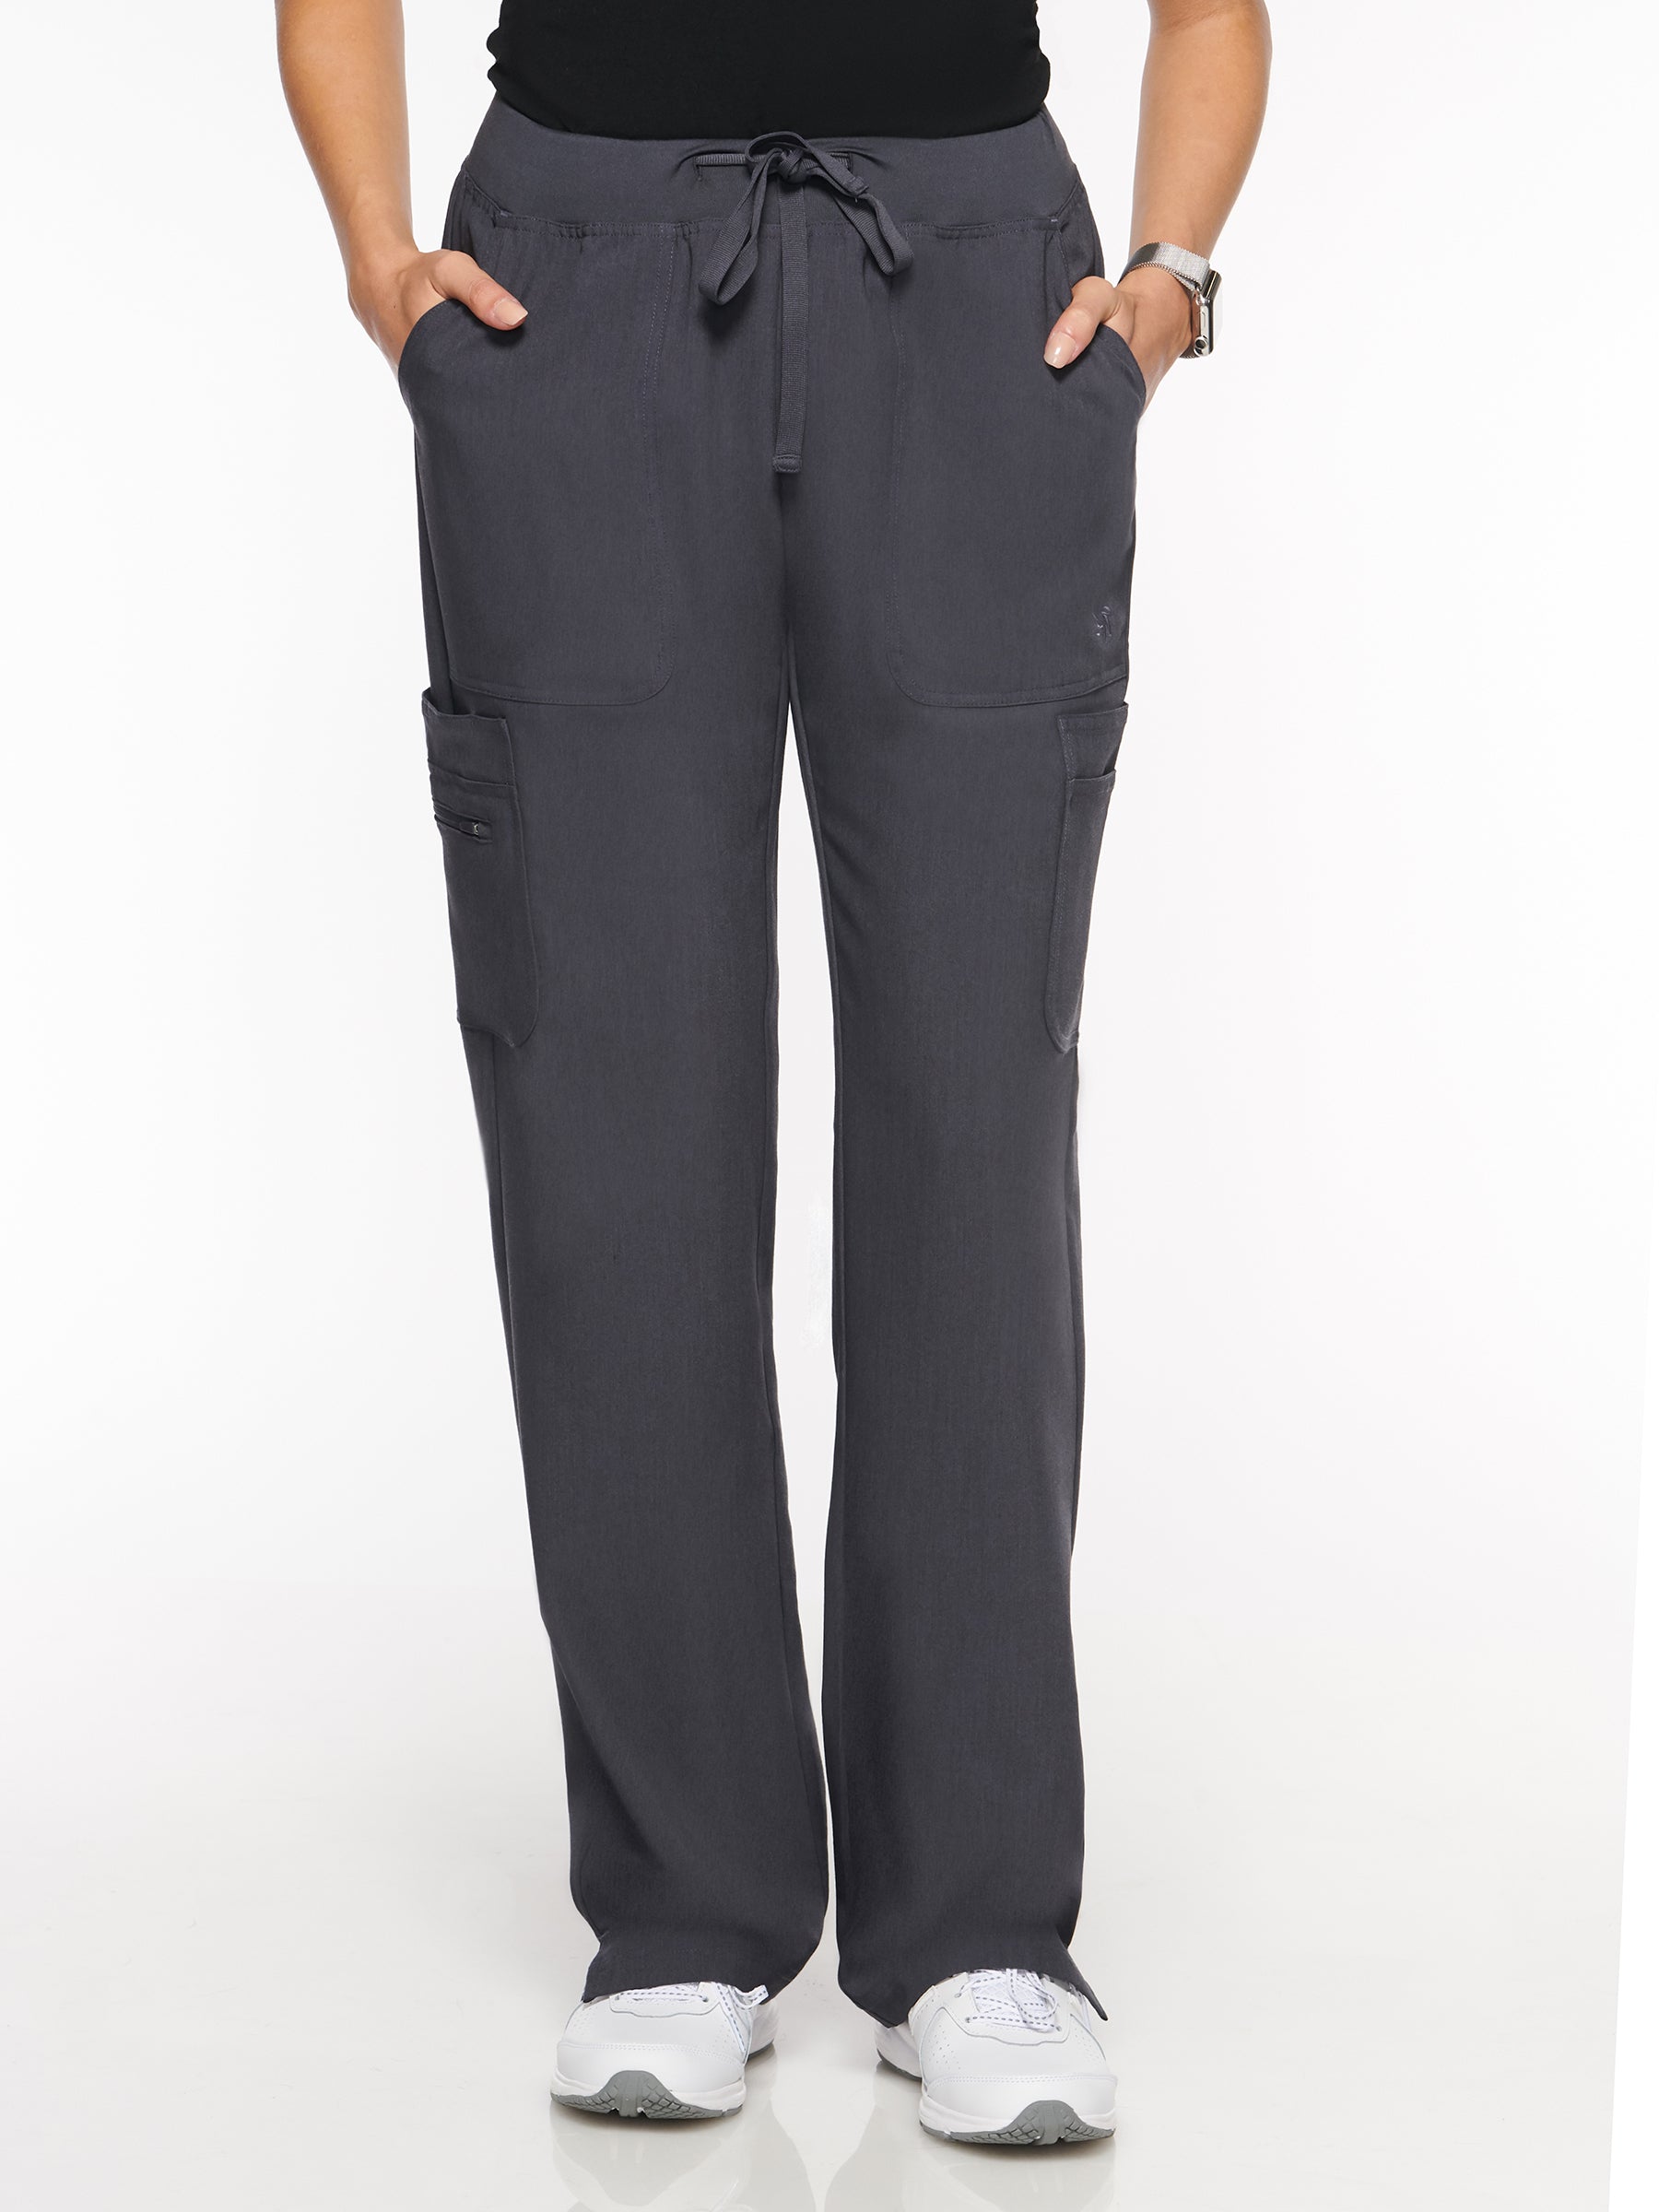 Womens Pant Yoga Pant with 9 Pockets – Long (93002L) - A Plus Medical Scrubs